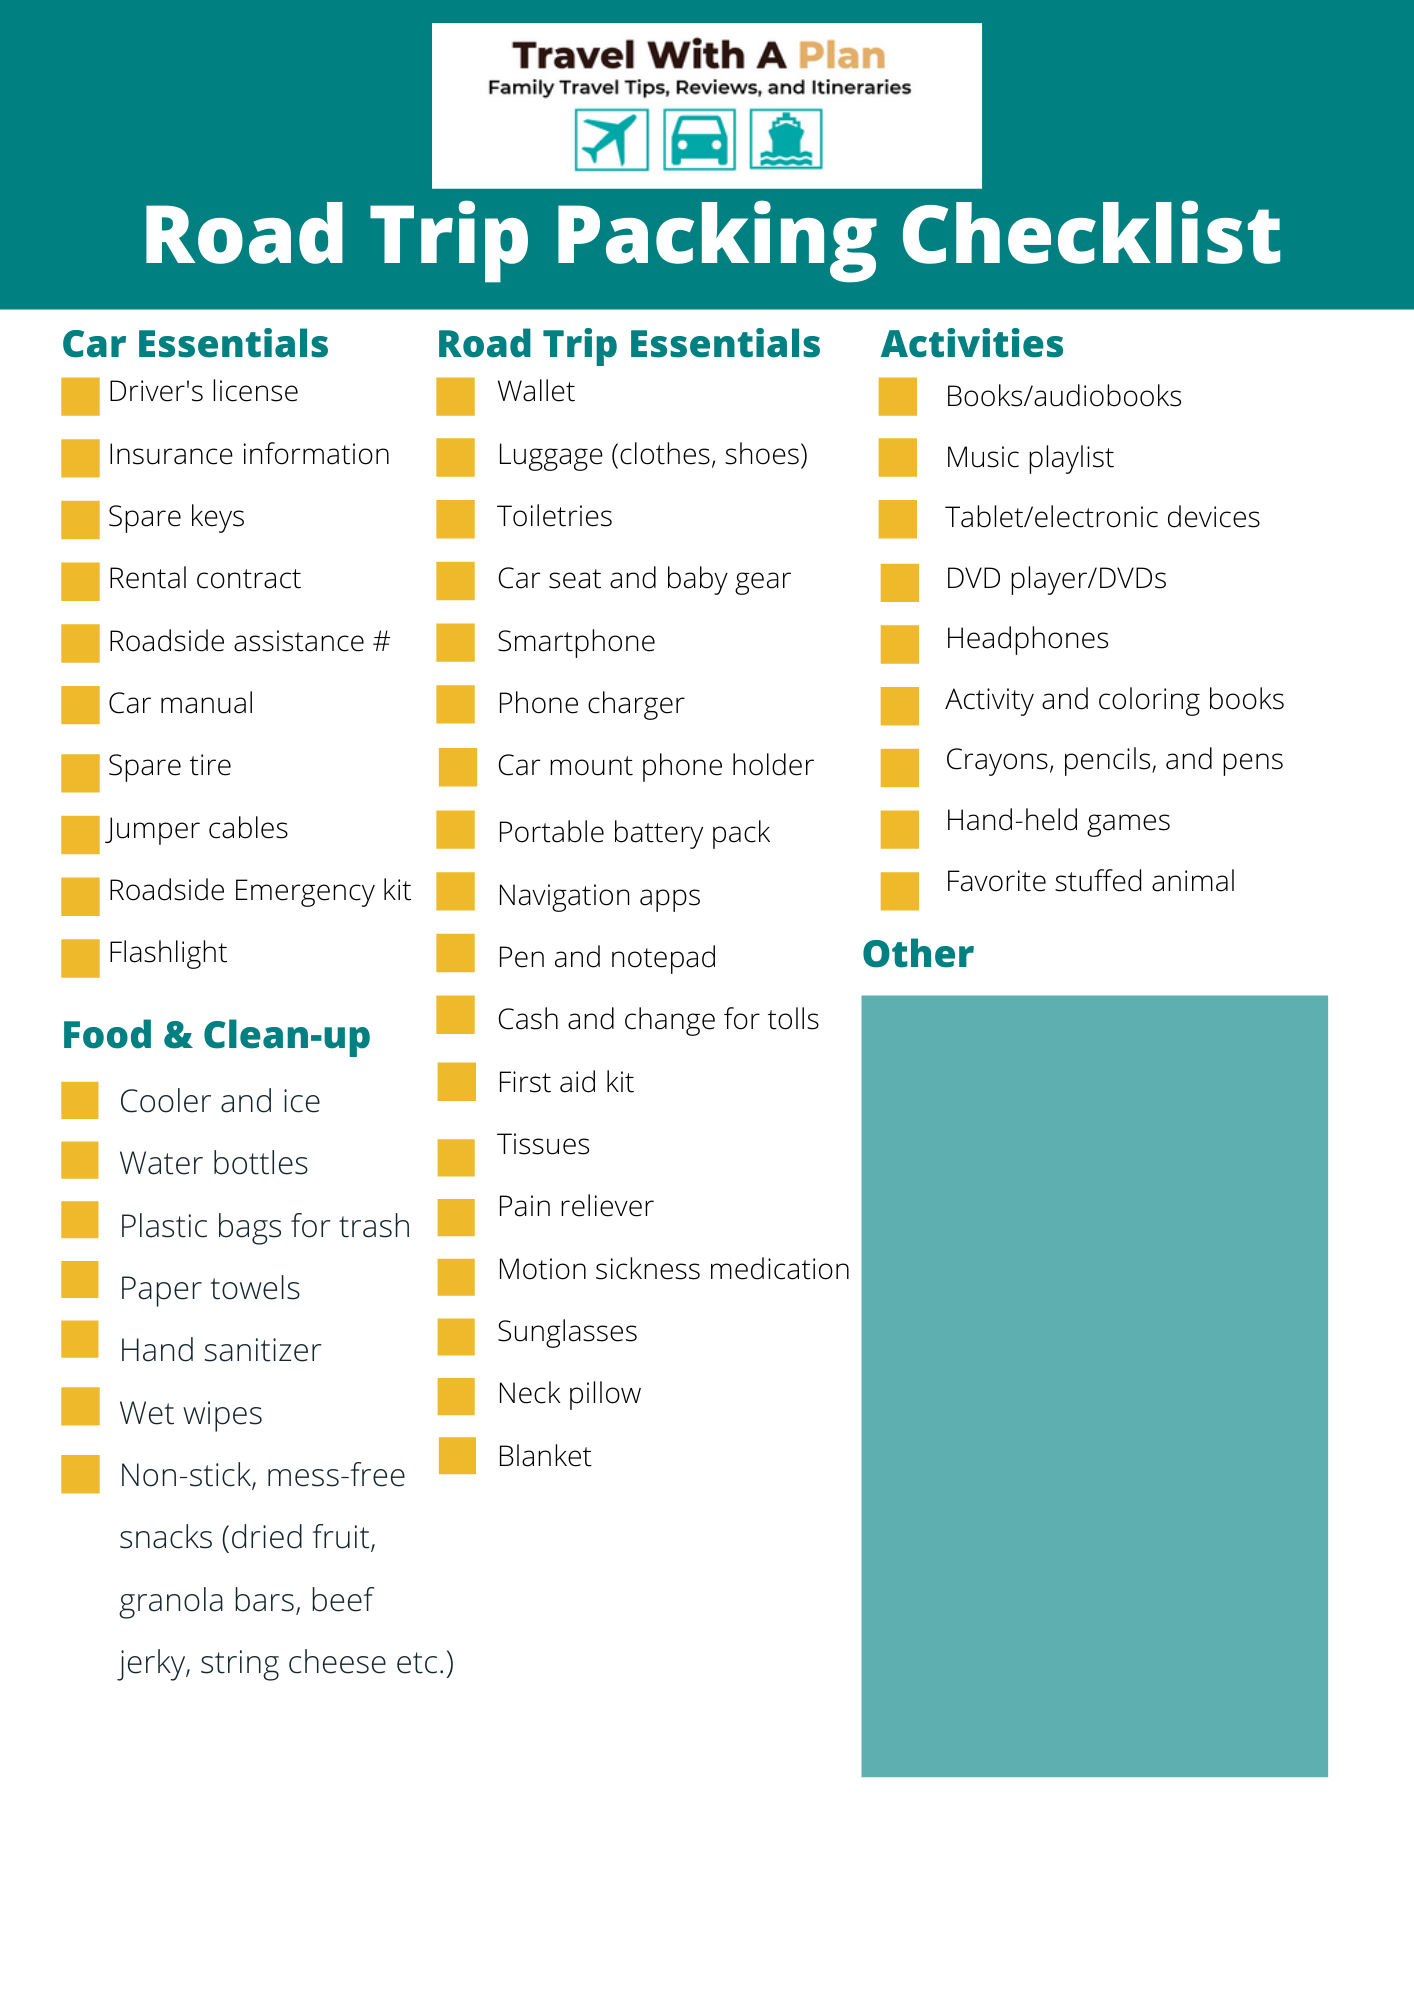 Top U.S. Family Travel Blog, Travel With A Plan, shares their family road trip packing list printable that they have perfected after years of road tripping together as a family!  Every item you will need for the perfect family road trip is included!  #roadtripessentials #familyroadtrippackinglist #roadtriplist #printableroadtripchecklist #familytravel #roadtriptips